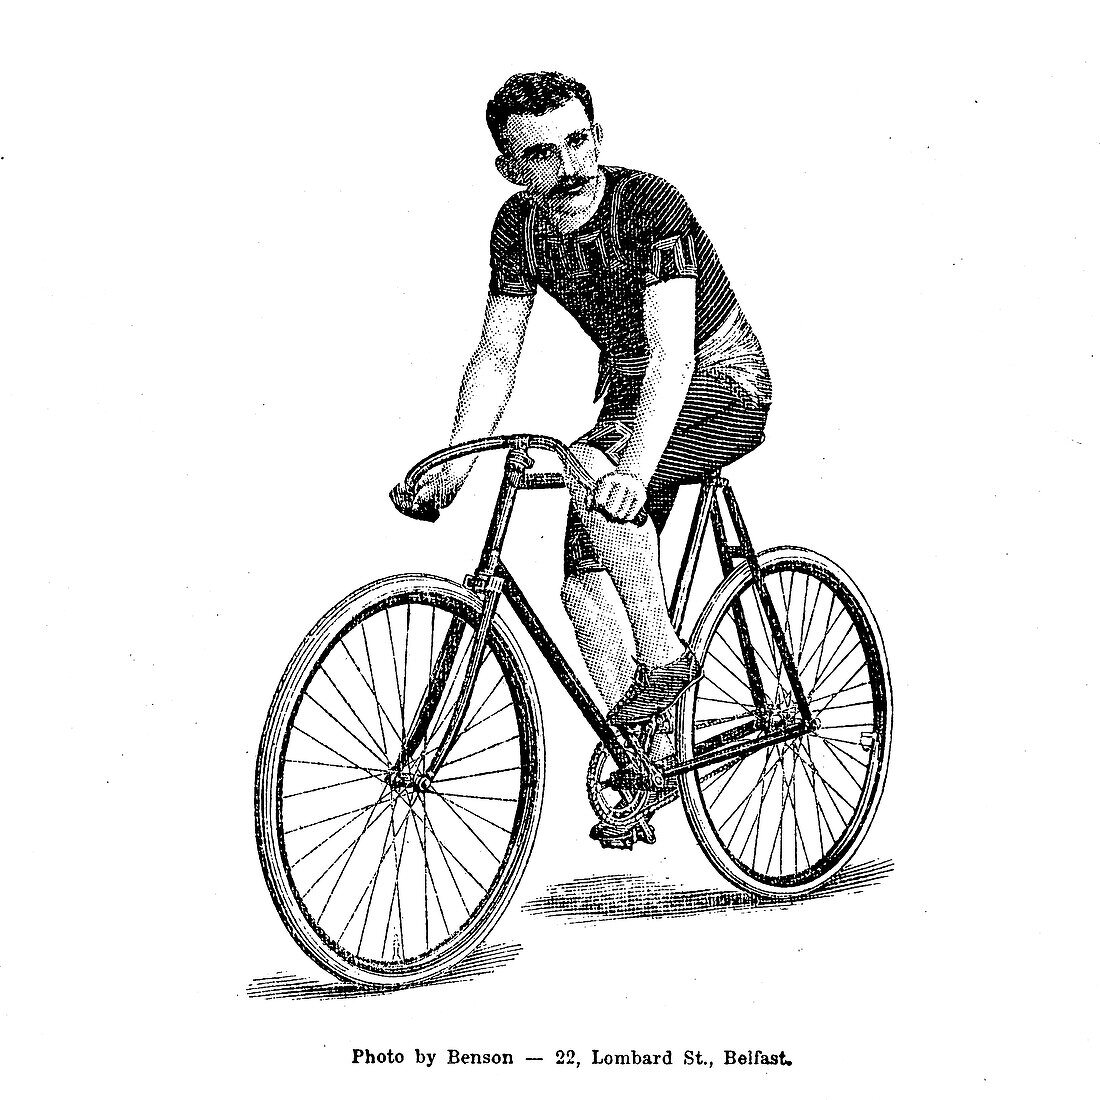 Sportsman racing on a bicycle, 19th century illustration